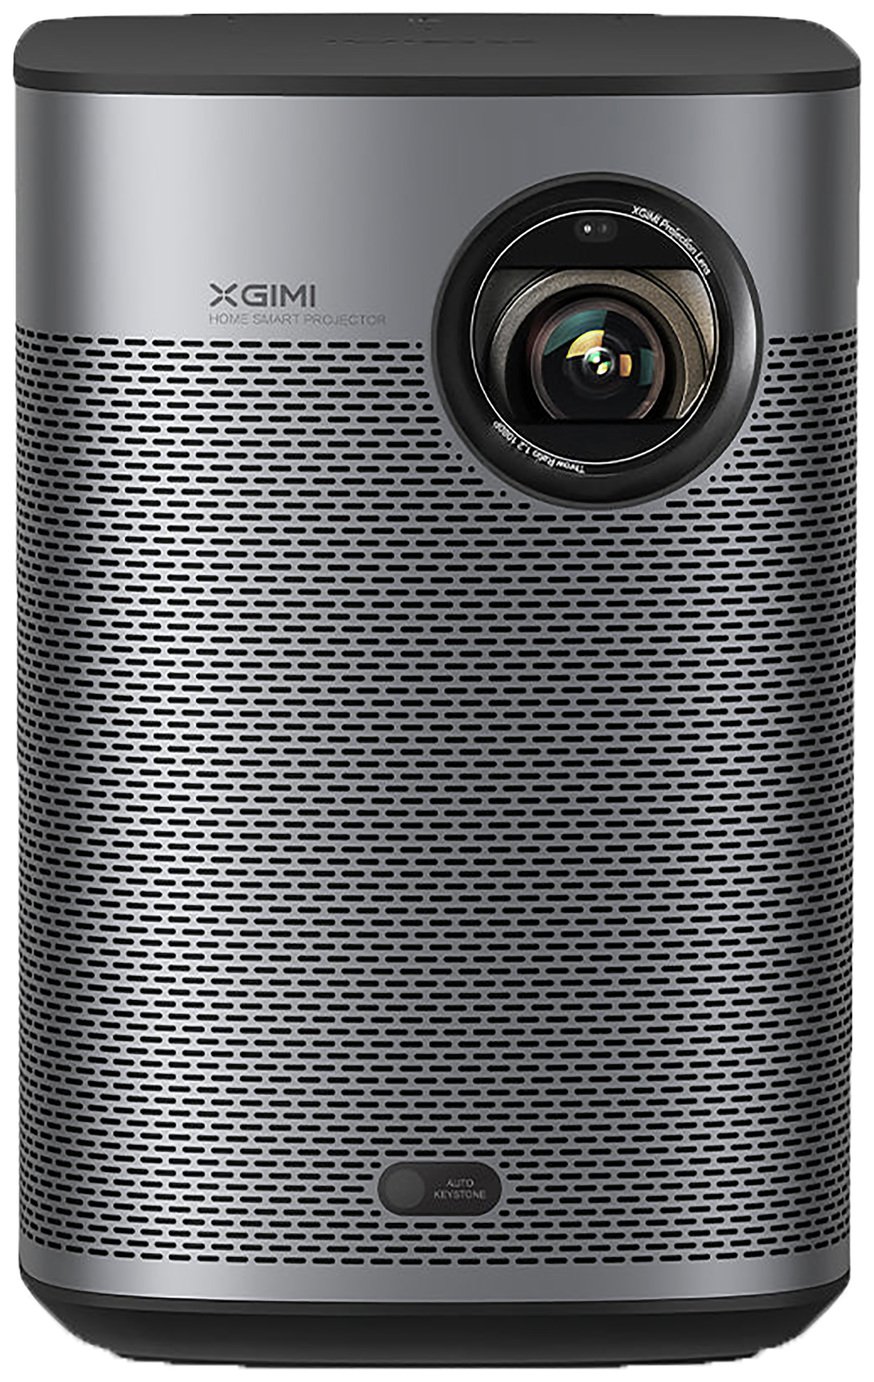 XGIMI Halo  900LM Full HD Portable Smart Projector